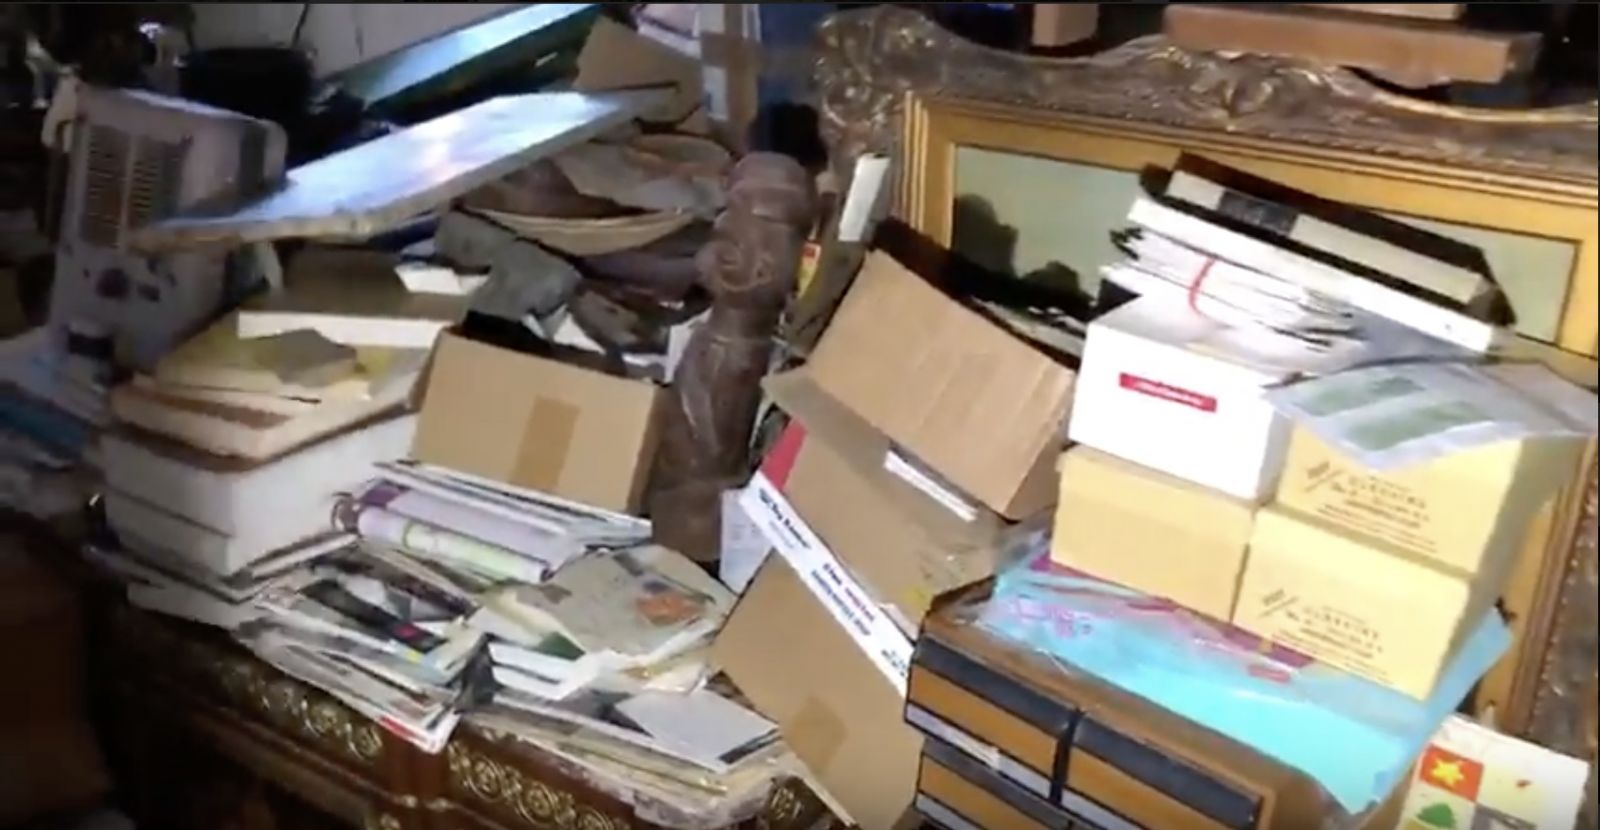 Boxes of letters, stamp collection, and coins surround countless works of art in this high-end hoarder estate.